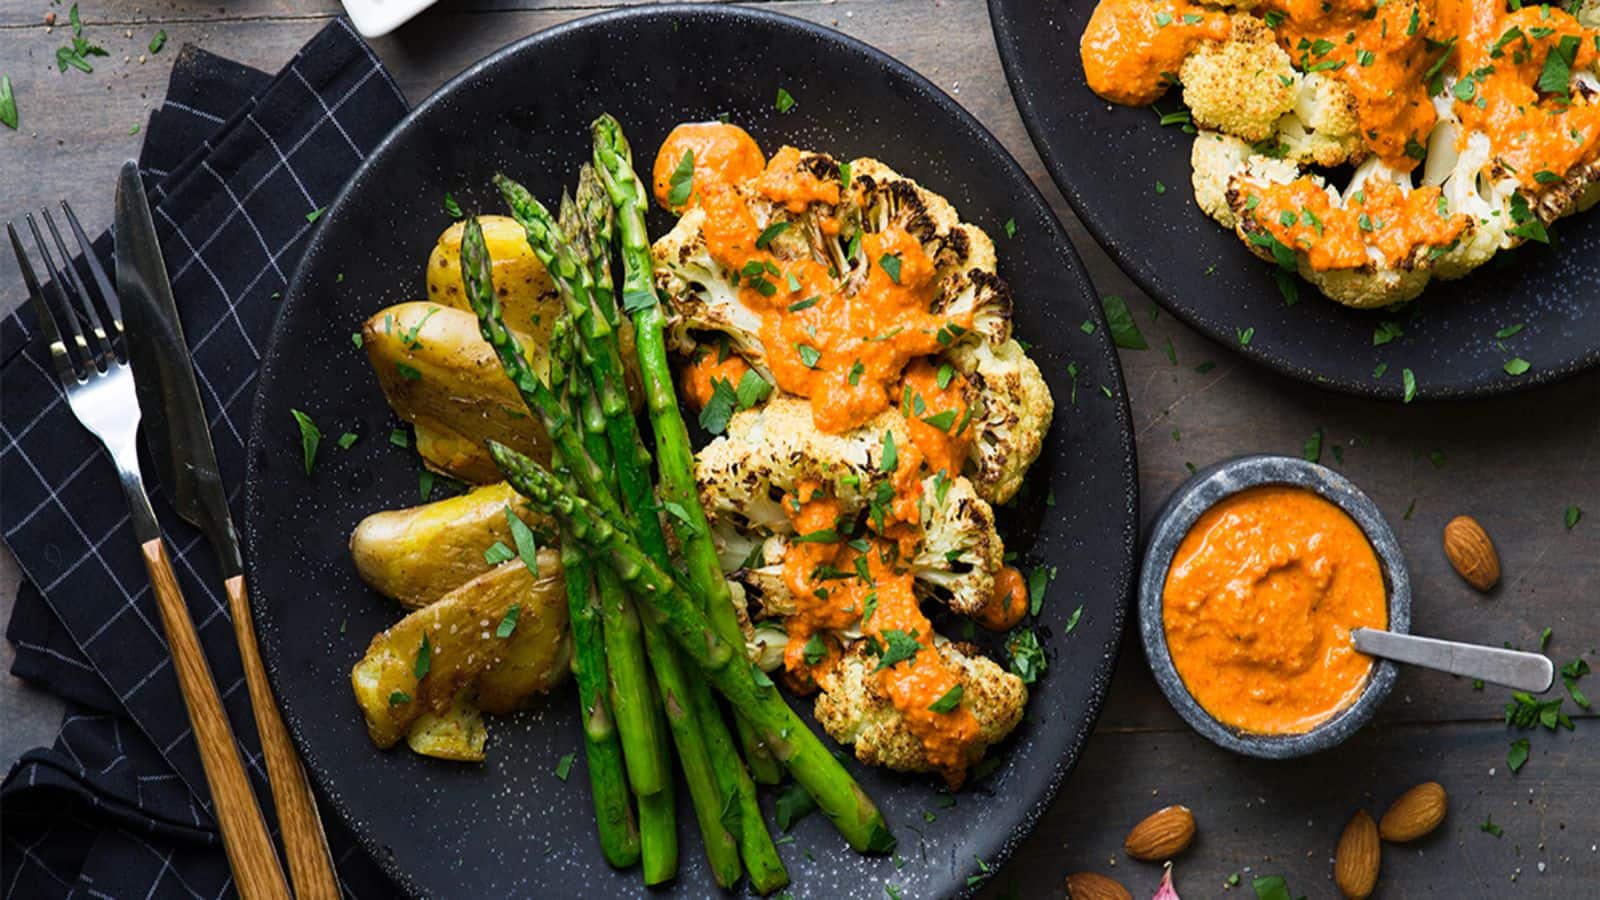 Check out this crispy cauliflower steaks recipe